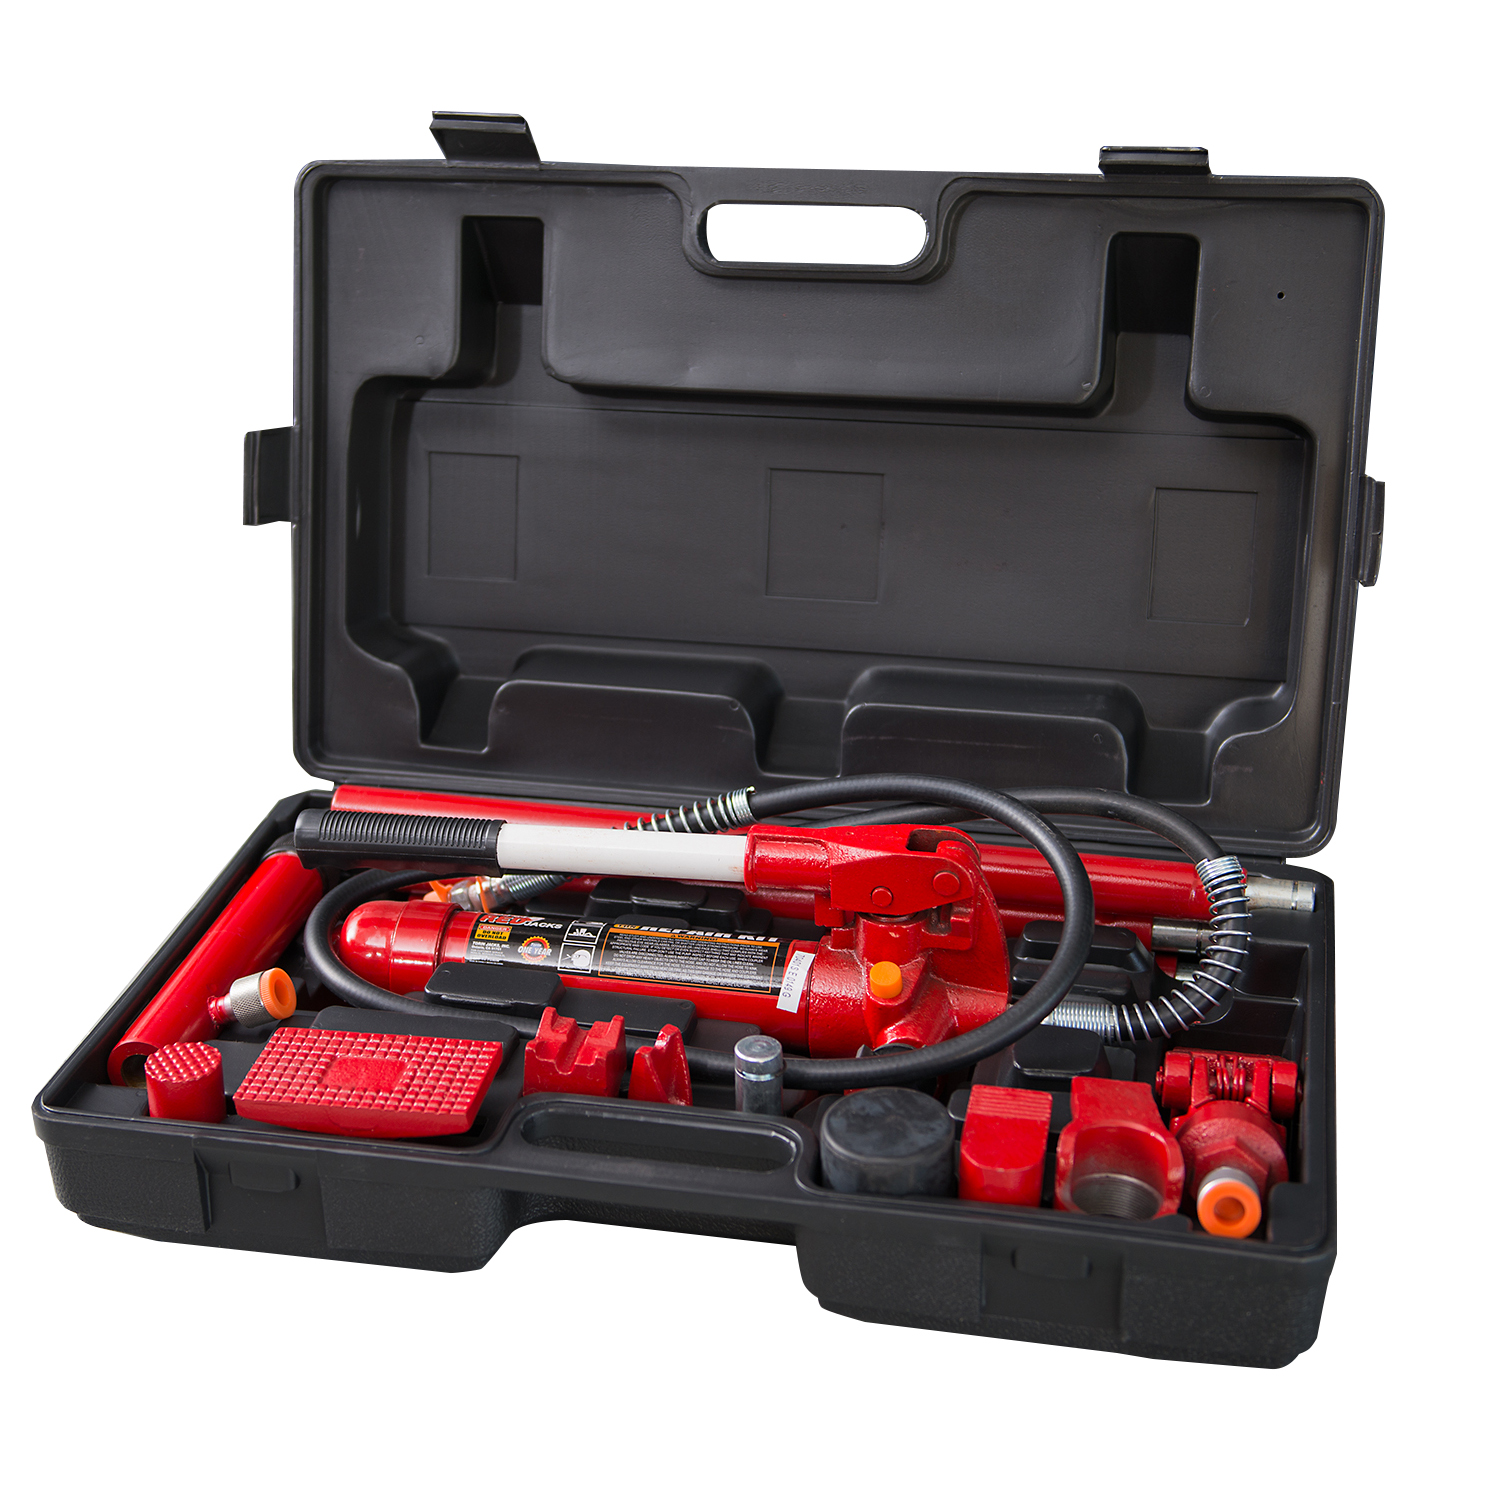 BIG RED Portable Hydraulic Ram: Auto Body Frame Repair Kit with Blow Mold  Carrying Storage Case, Ton (8,000 lb) Capacity, Red, W704-1